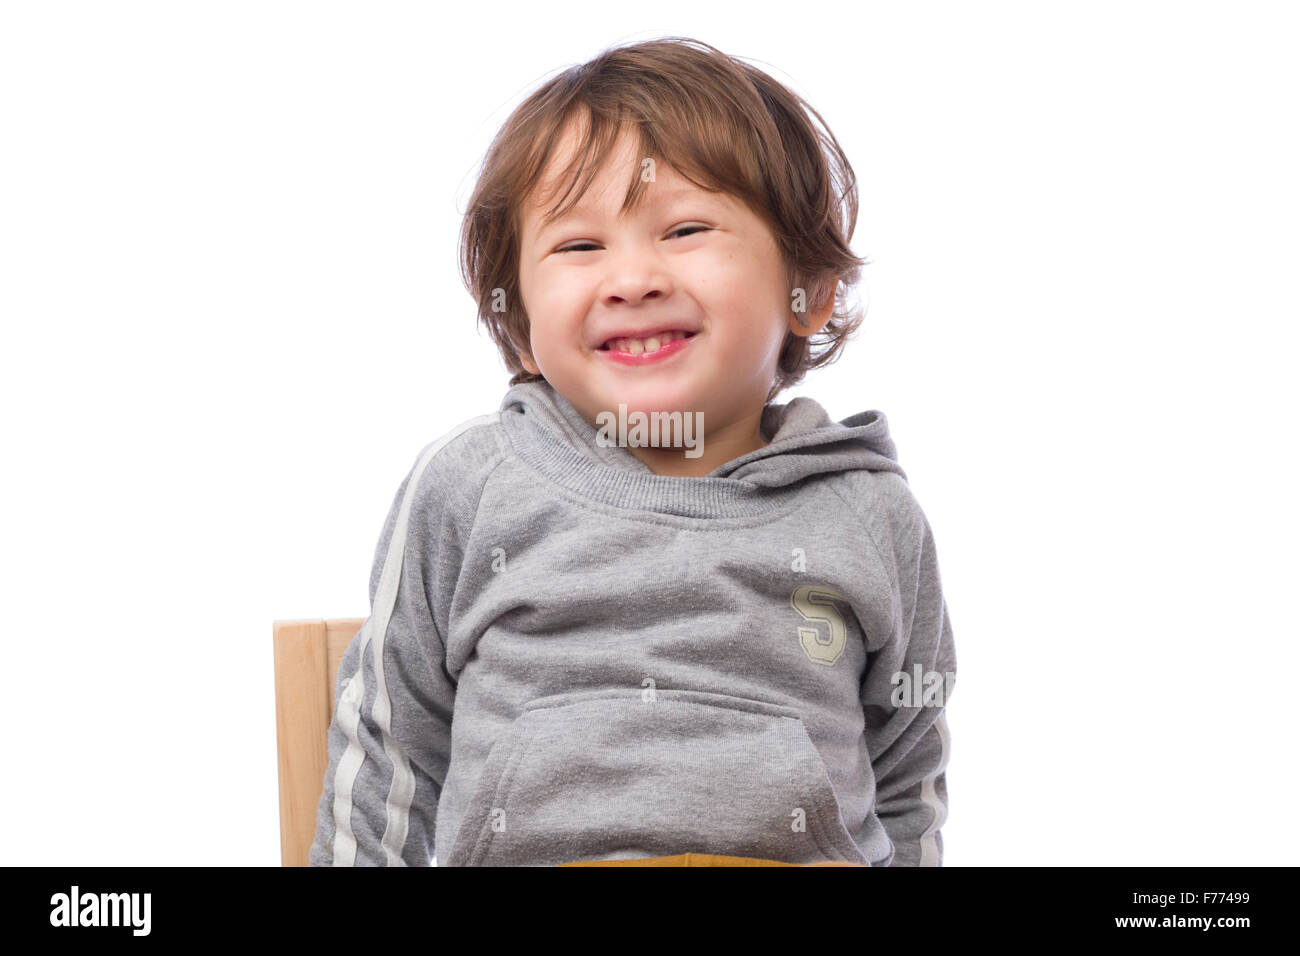 A cute 3 year old boy with a happy expression on a white background. Stock Photo